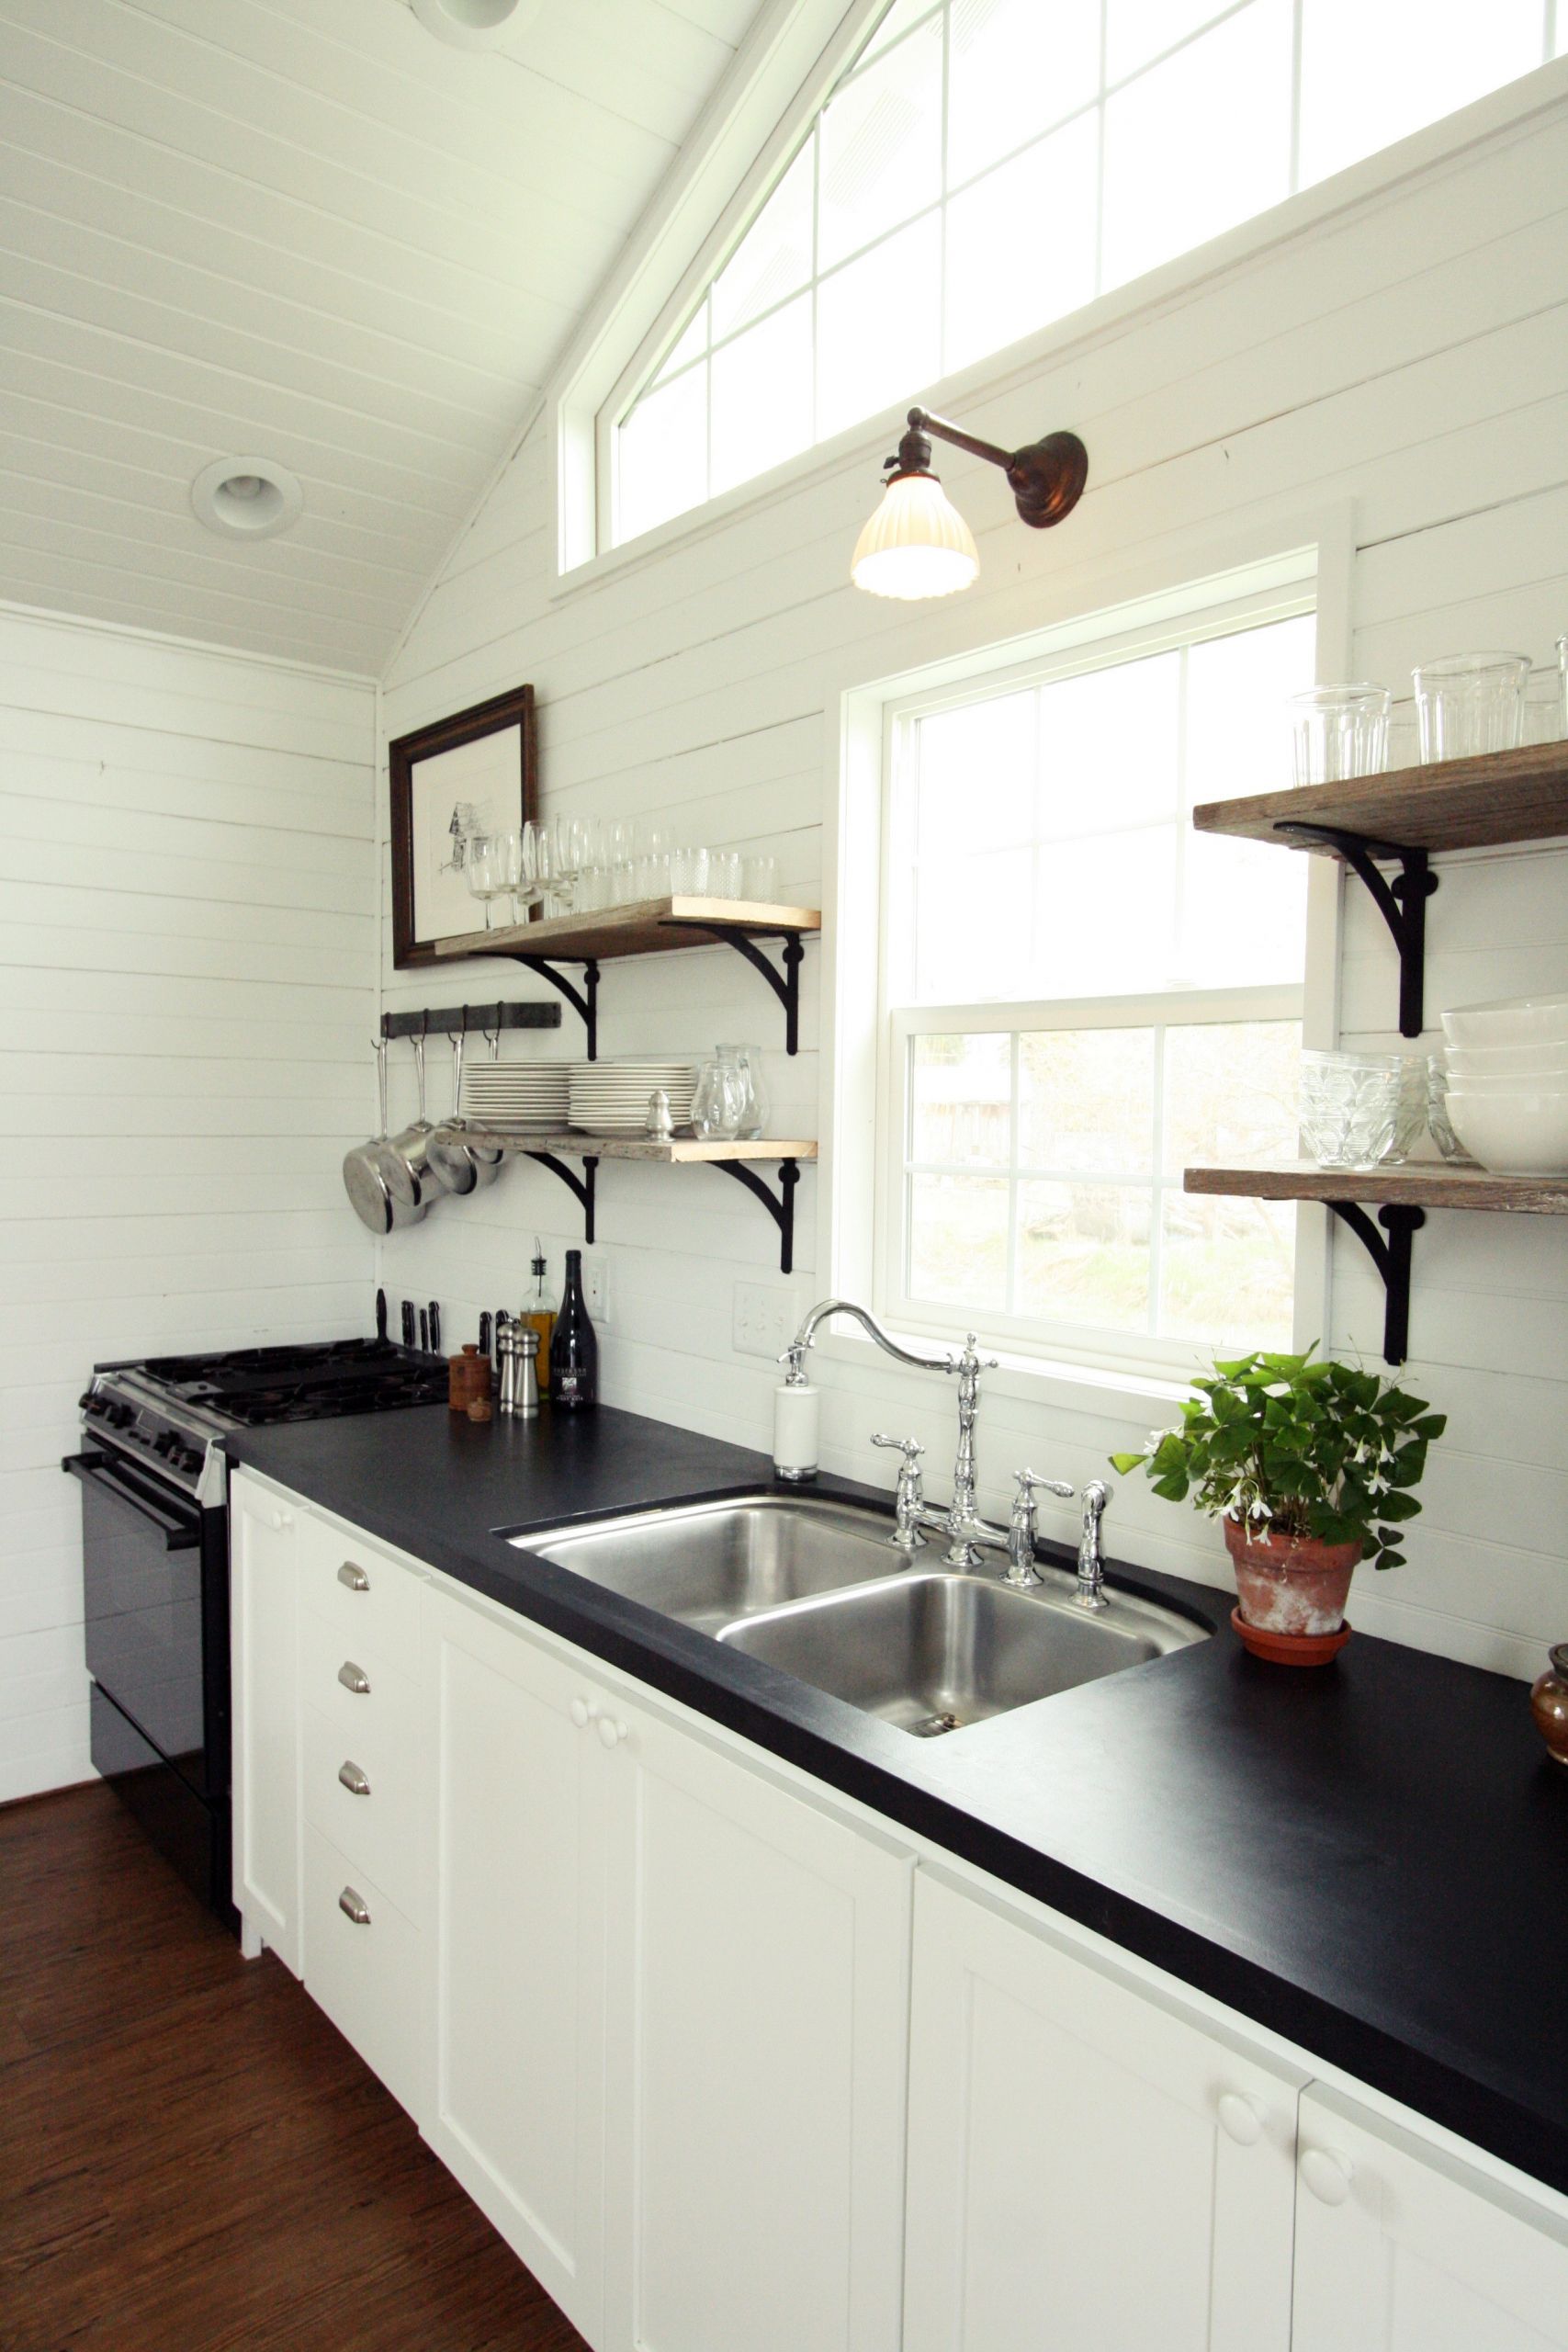 Wall Mount Kitchen Sinks
 Most Re mended Lighting over Kitchen Sink – HomesFeed